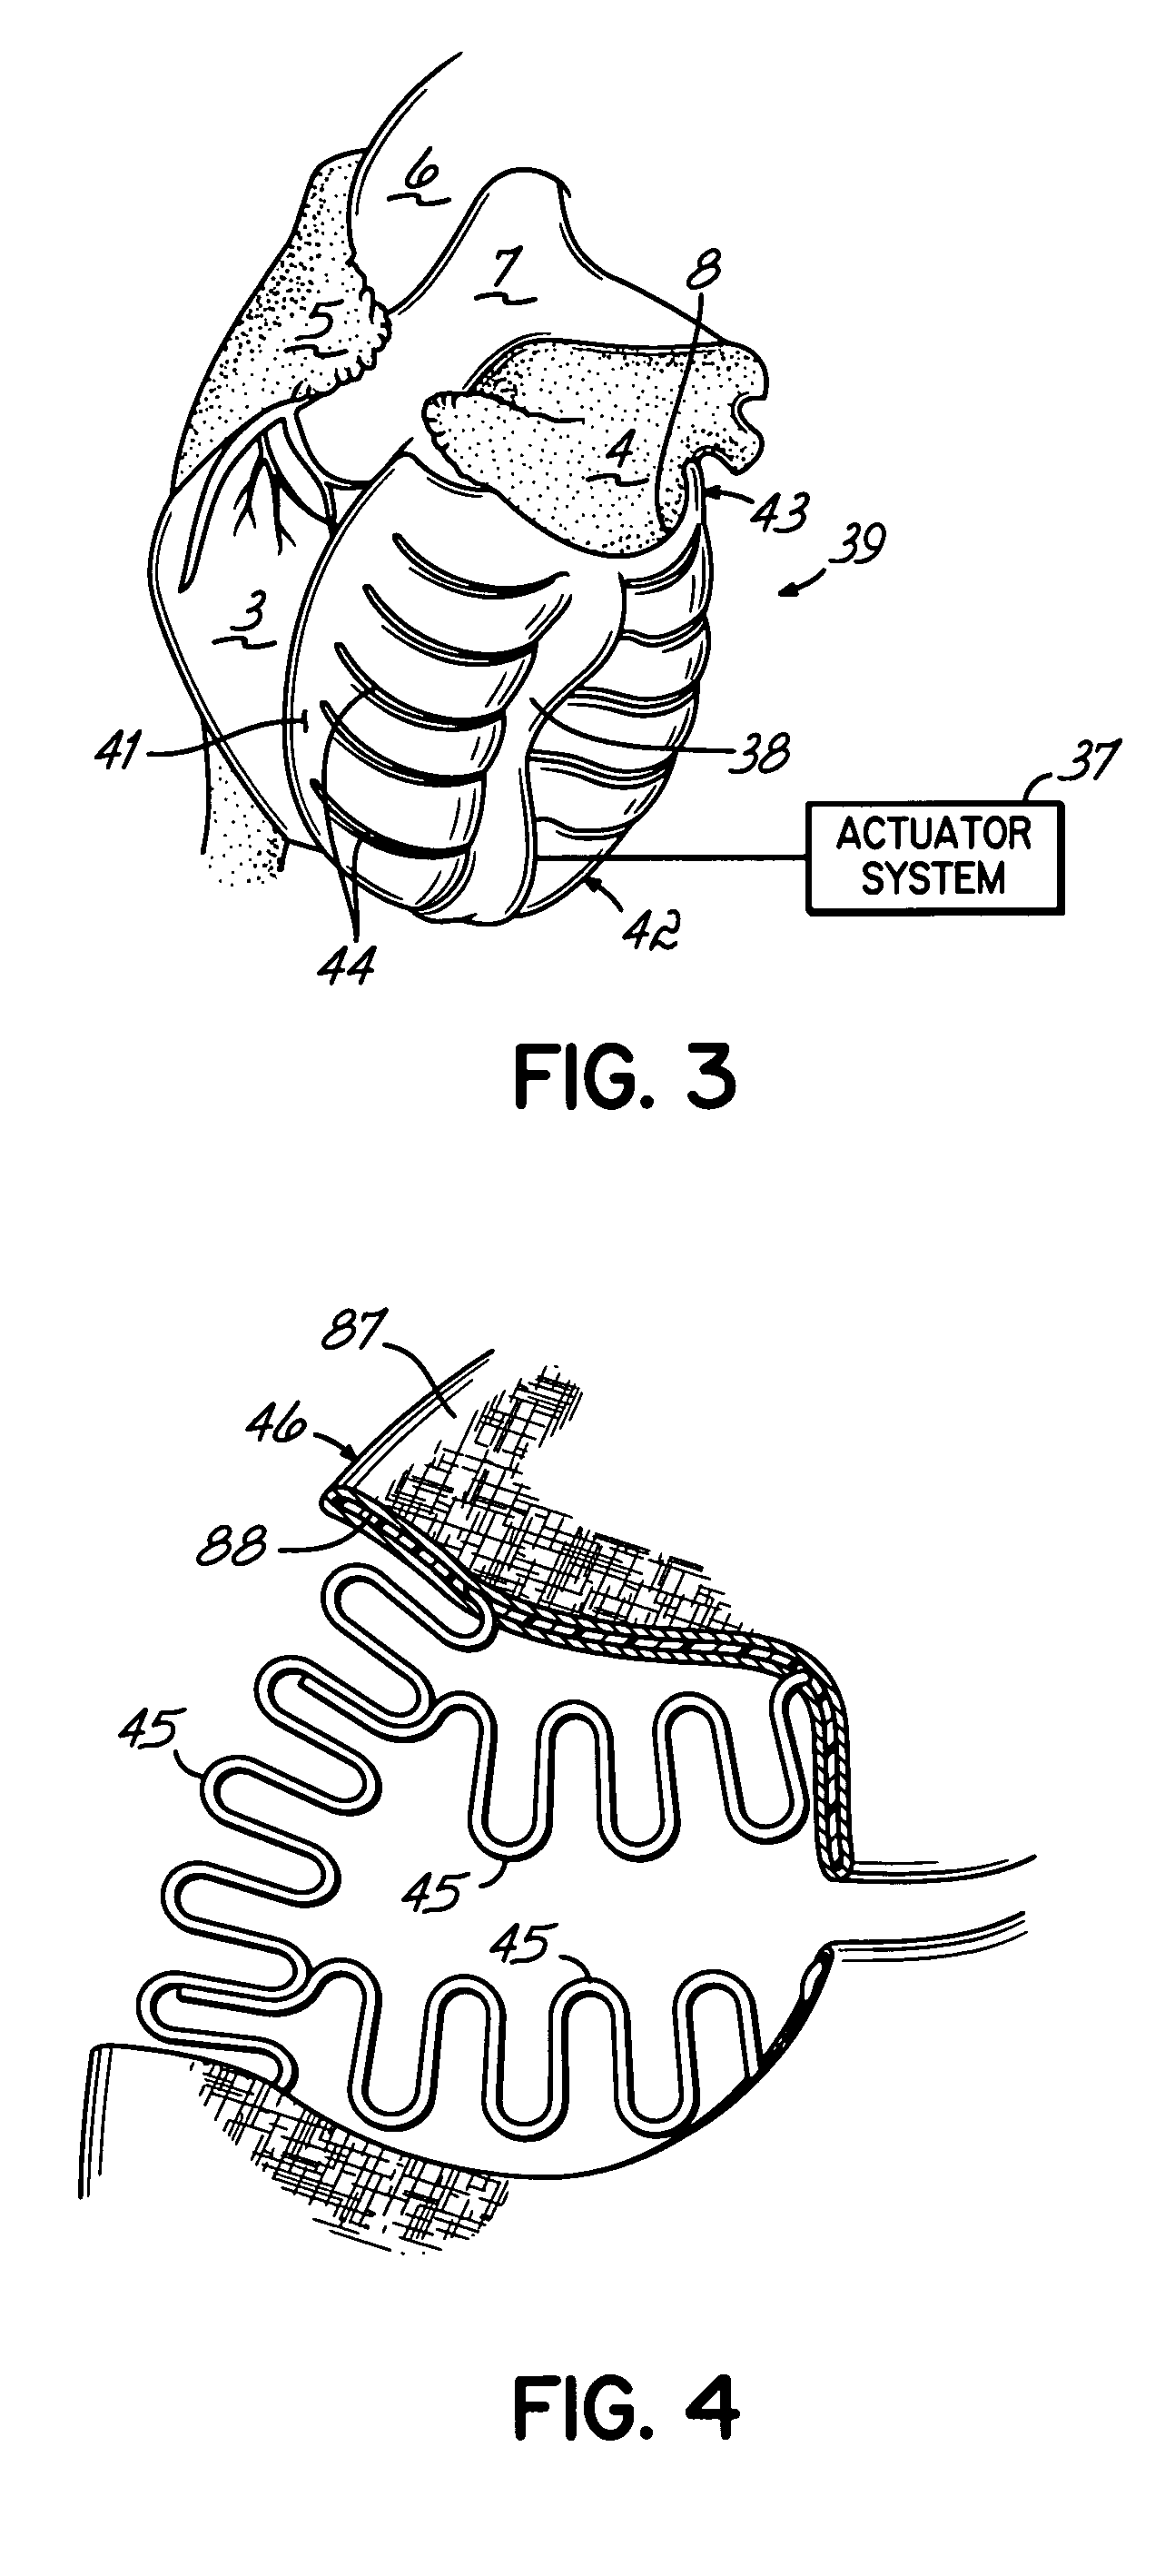 Deforming jacket for a heart actuation device